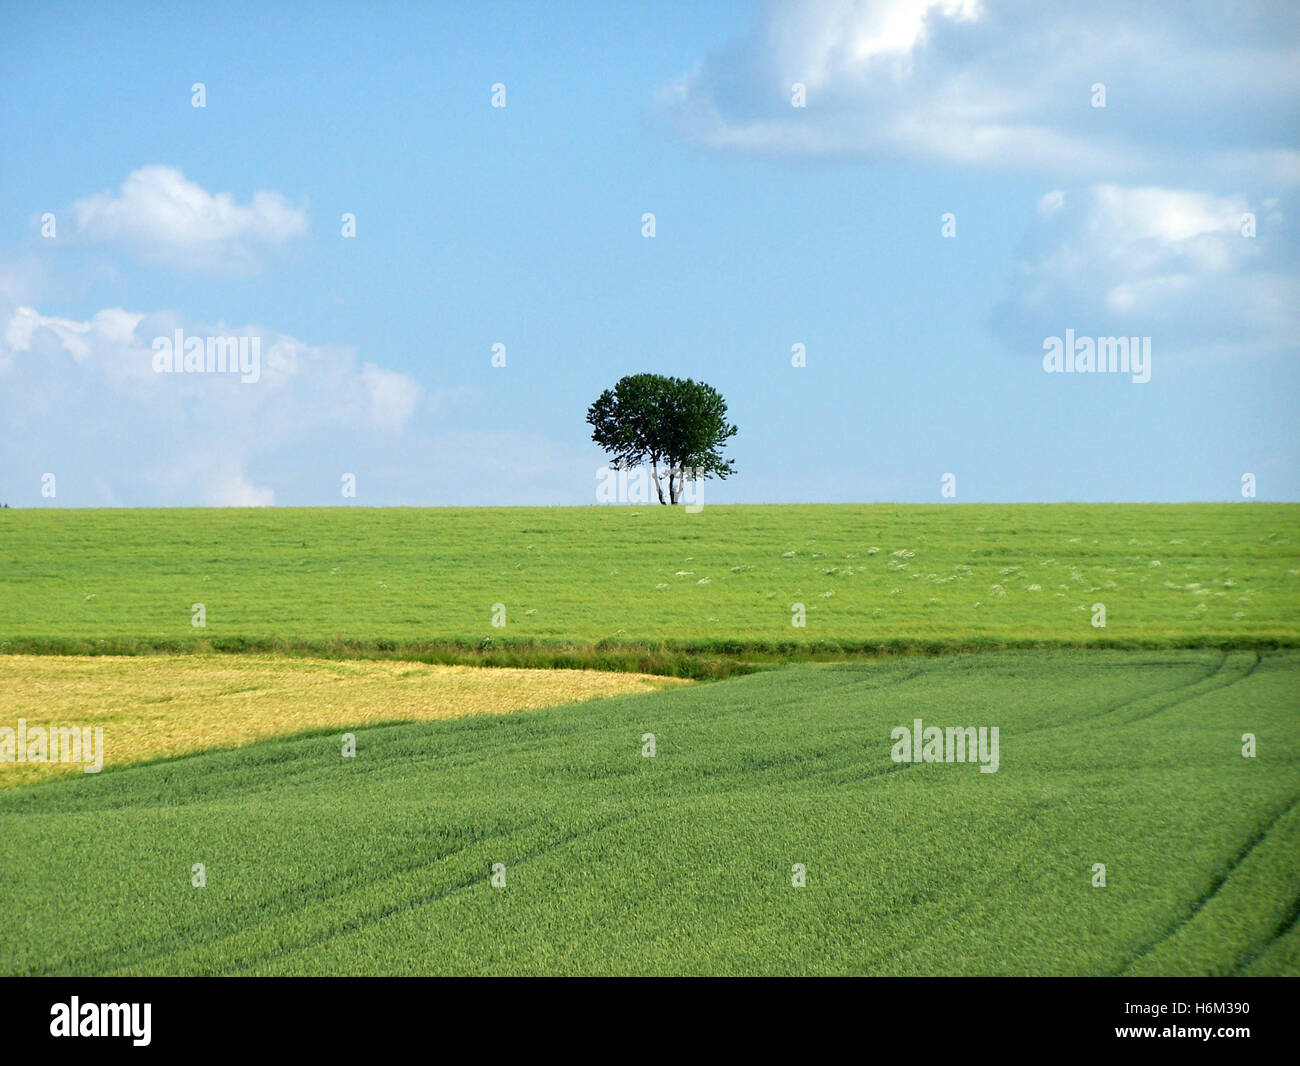 trees forests Stock Photo